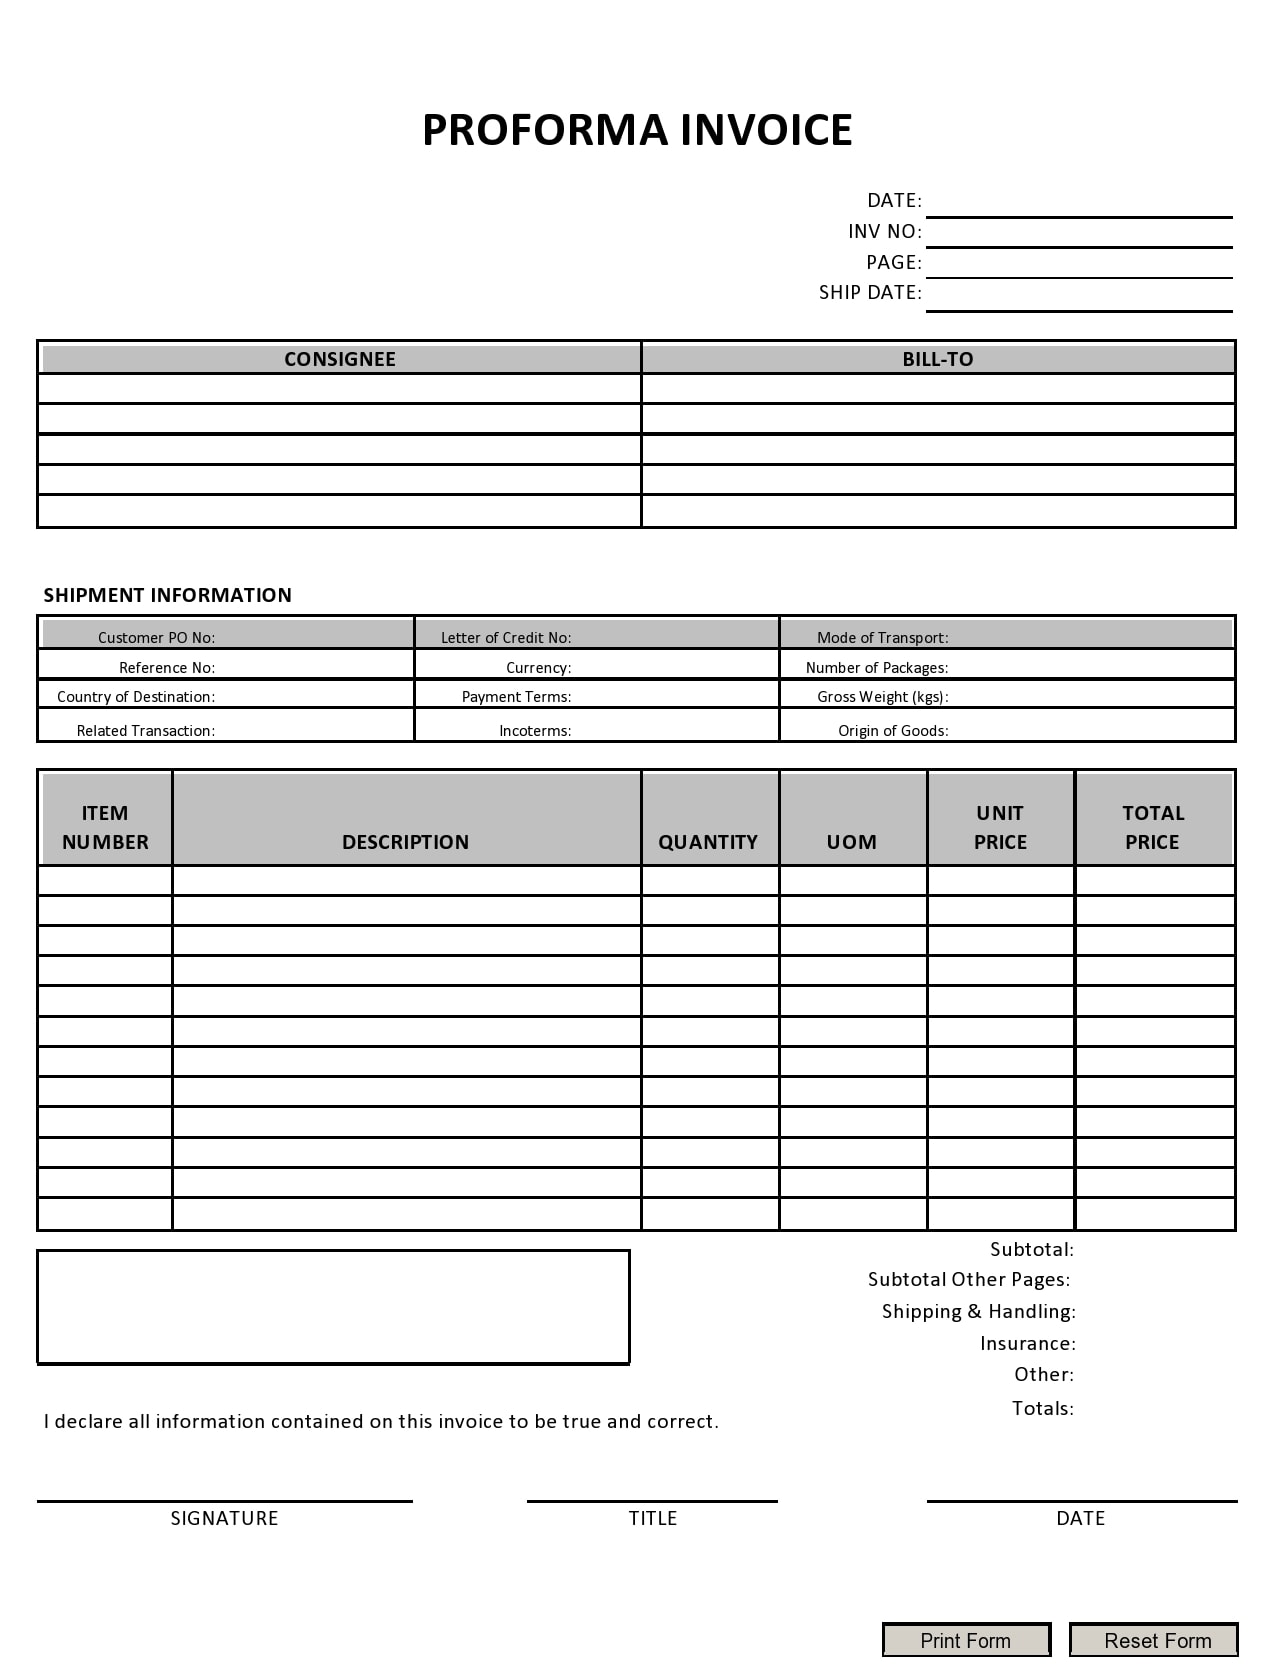 30 Free Proforma Invoice Templates [Excel, Word, PDF] TemplateArchive